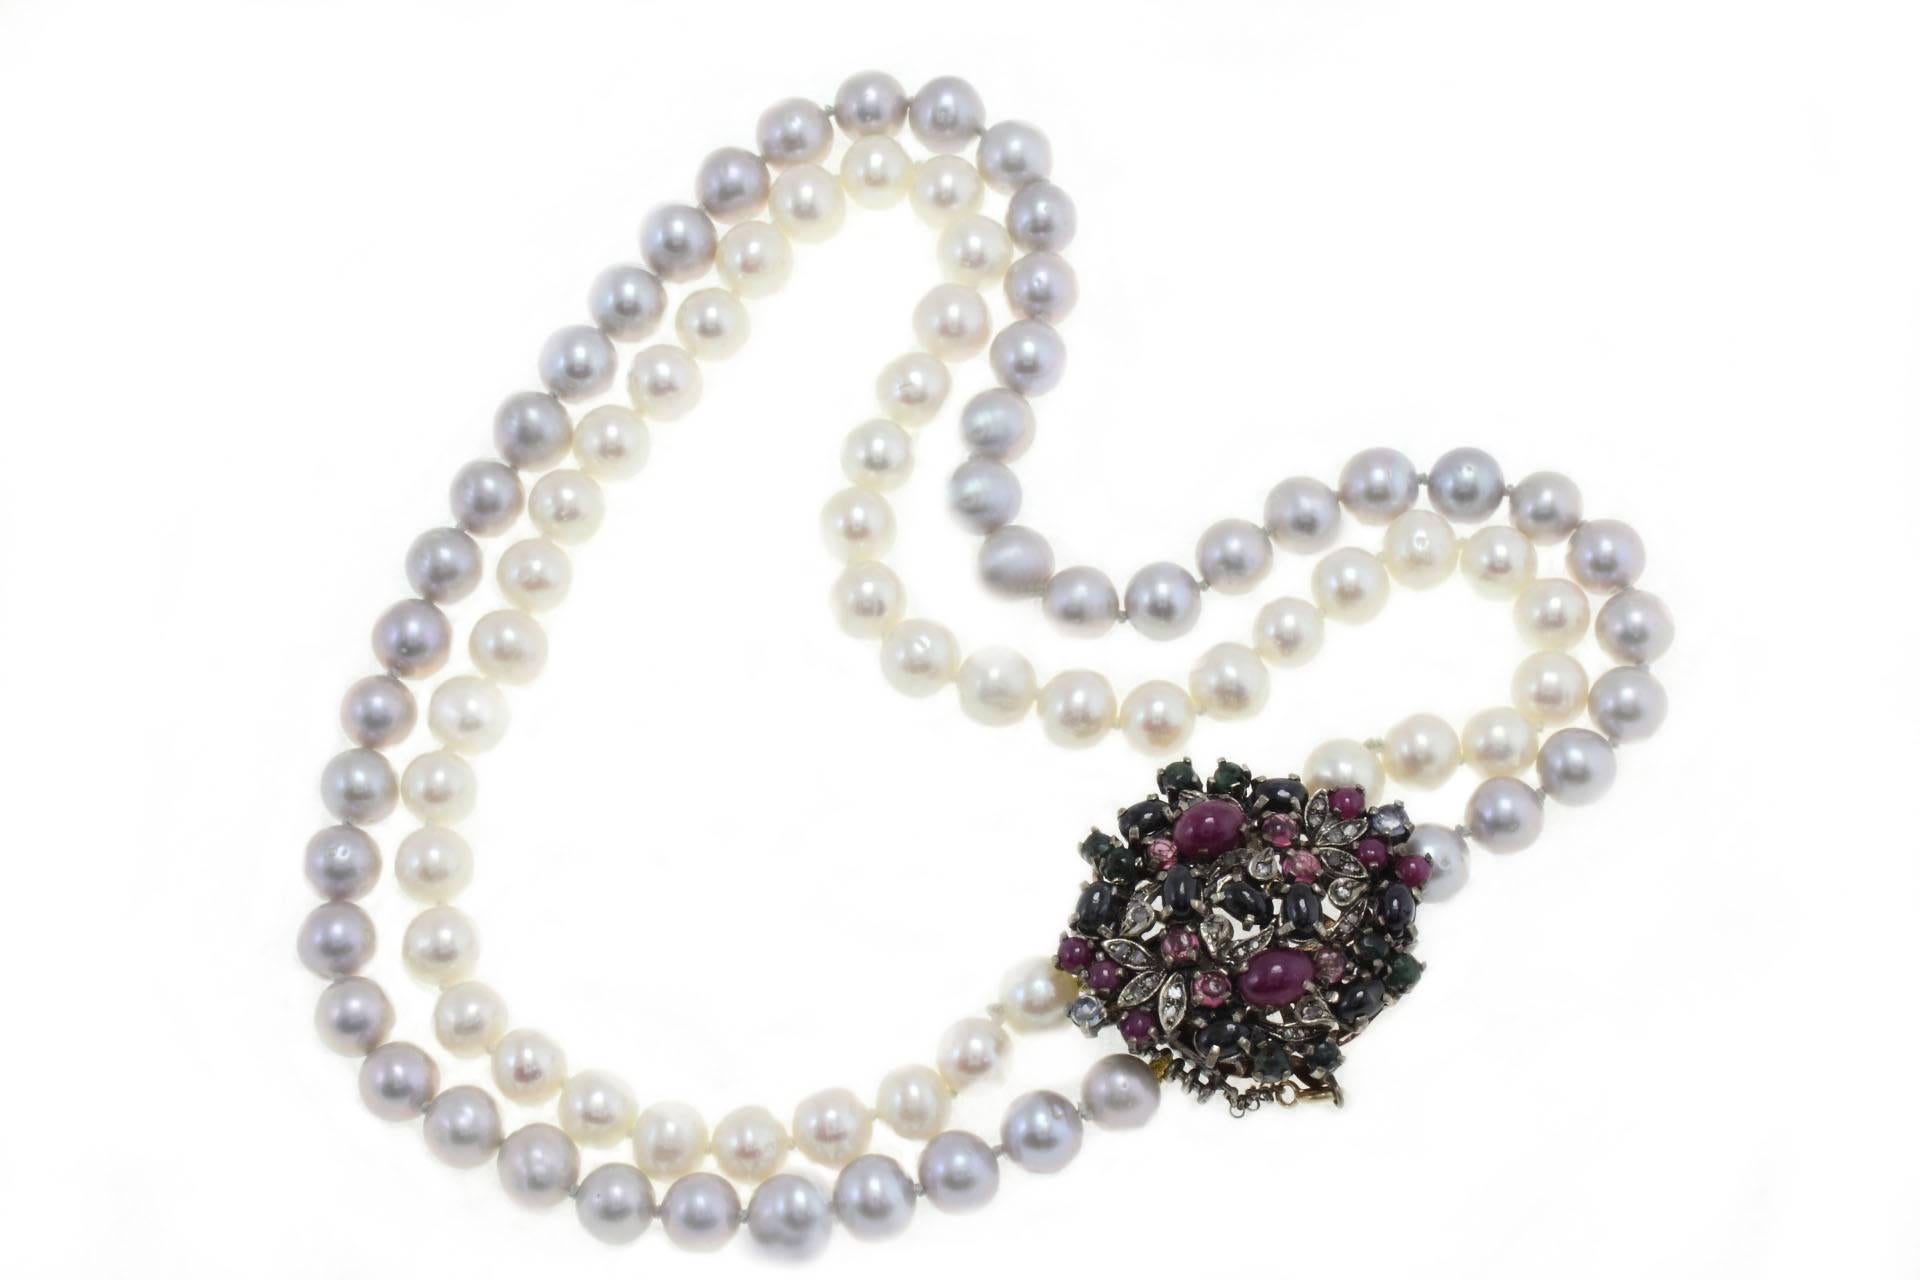 Beaded necklace composed of two rows of pearls (one gray, one white) with a clasp  in 9kt gold and silver mounted with diamonds,  rubies, blue sapphires and emeralds.

pearls (86.10 gr) (9 mm), 
diamonds (0.27 kt) 
rubies, blue sapphires and